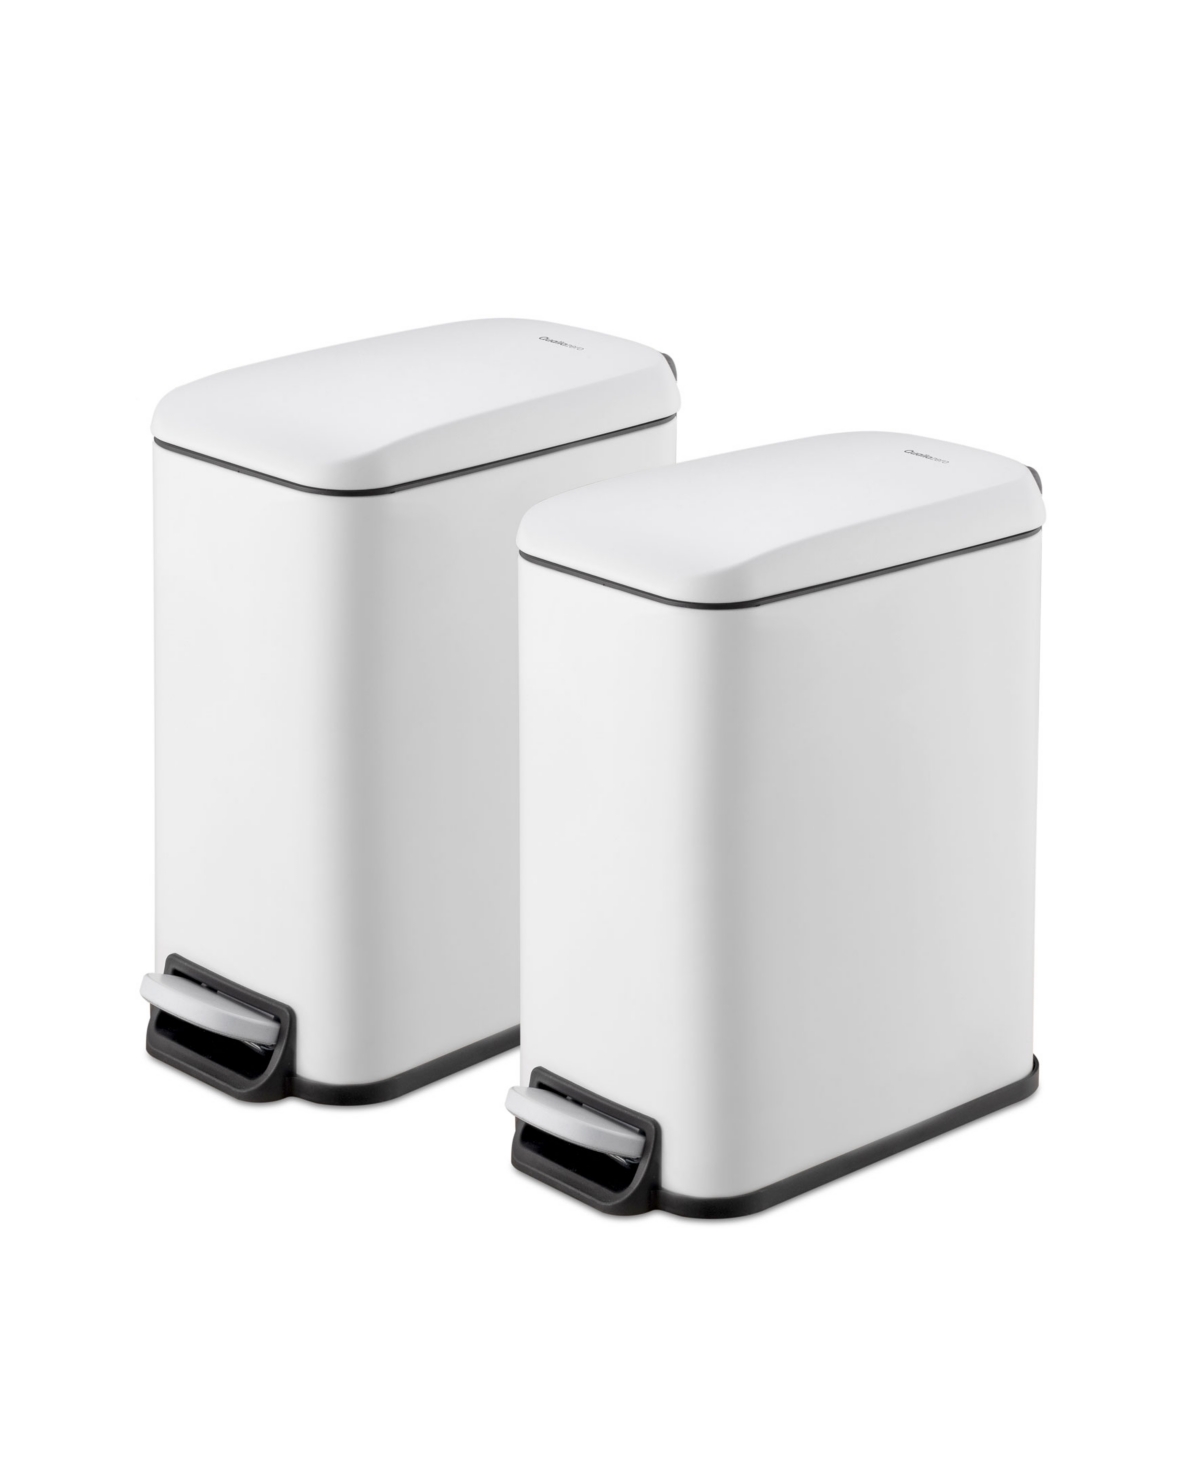 Qualiazero Two 1.3 Gallon Slim Step On Trash Can Set, 2 Pieces, Twin Pack In Matte White